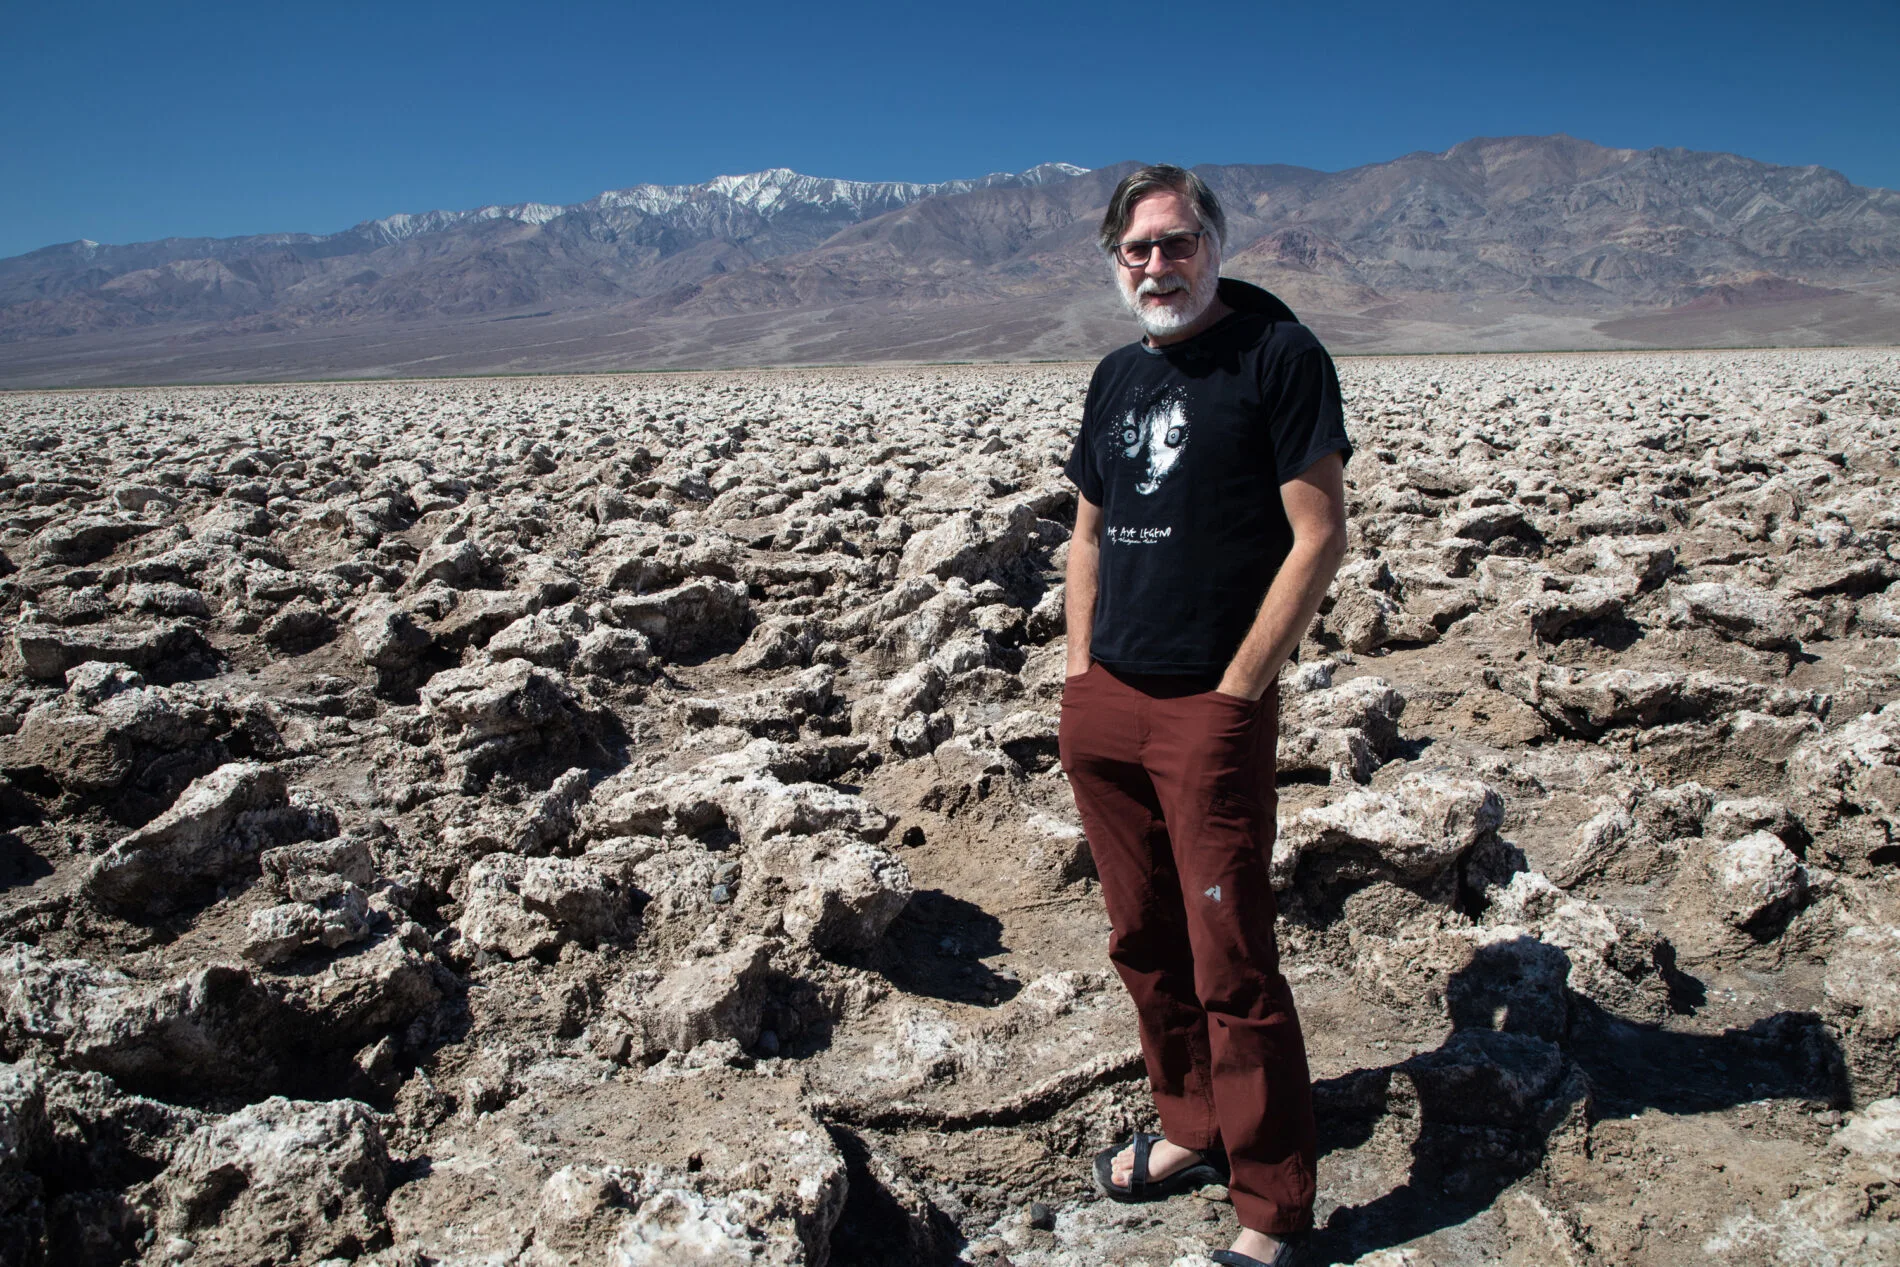 Jim is enjoying the weather at the Devil's Golf Course while hiking in Death Valley.